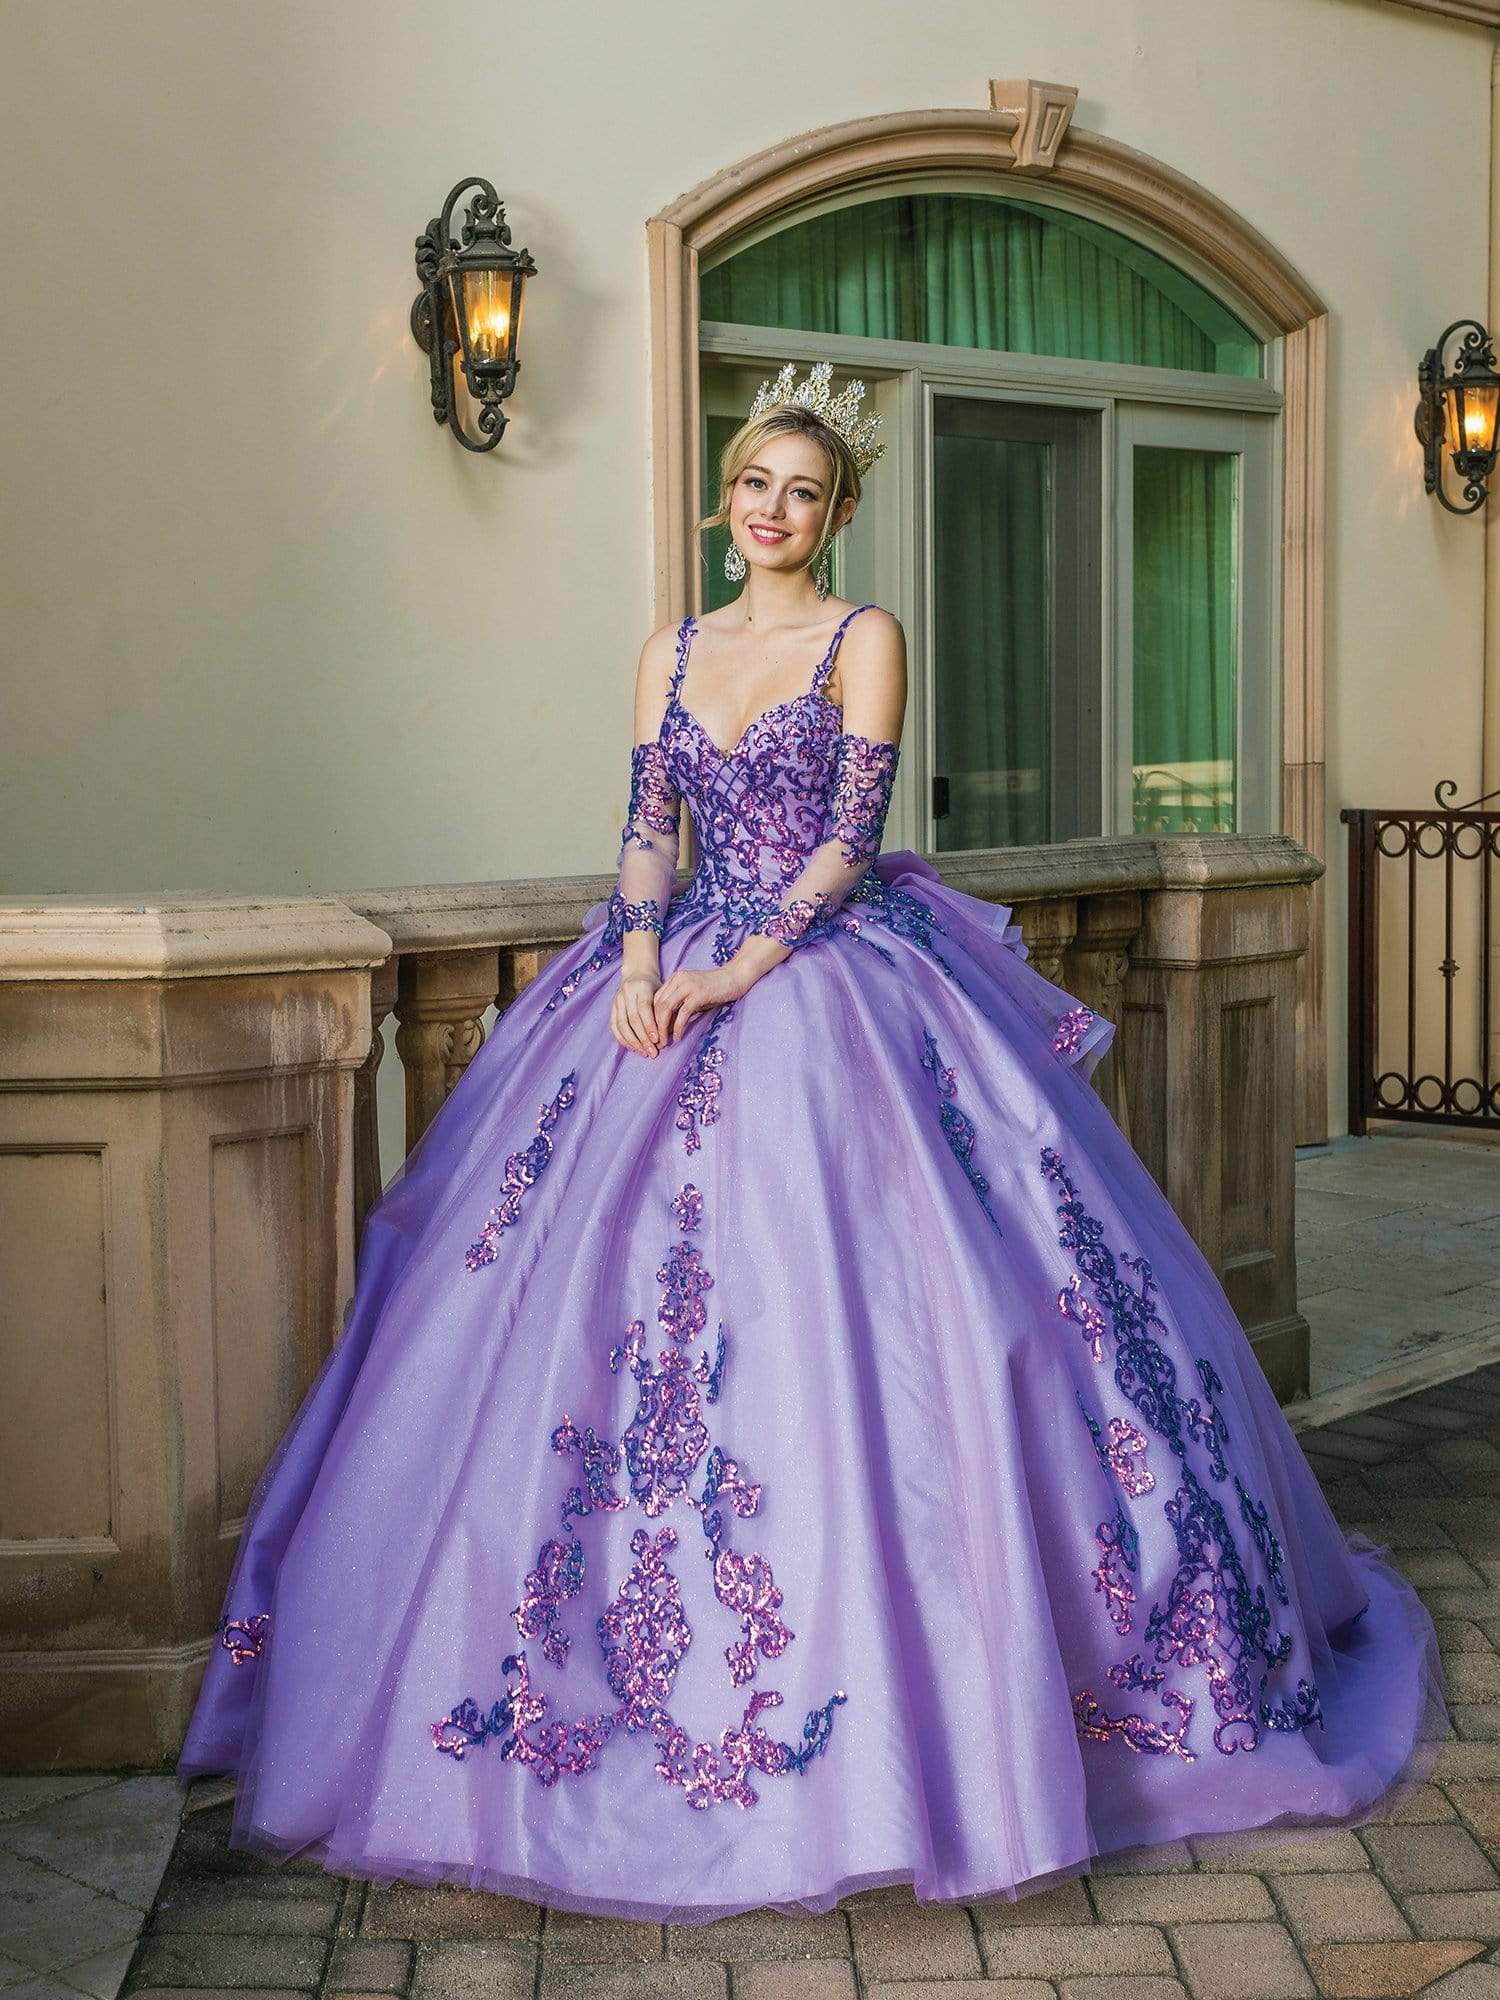 Dancing Queen - 1652 Shimmer Applique Ballgown with Bow Accent ...